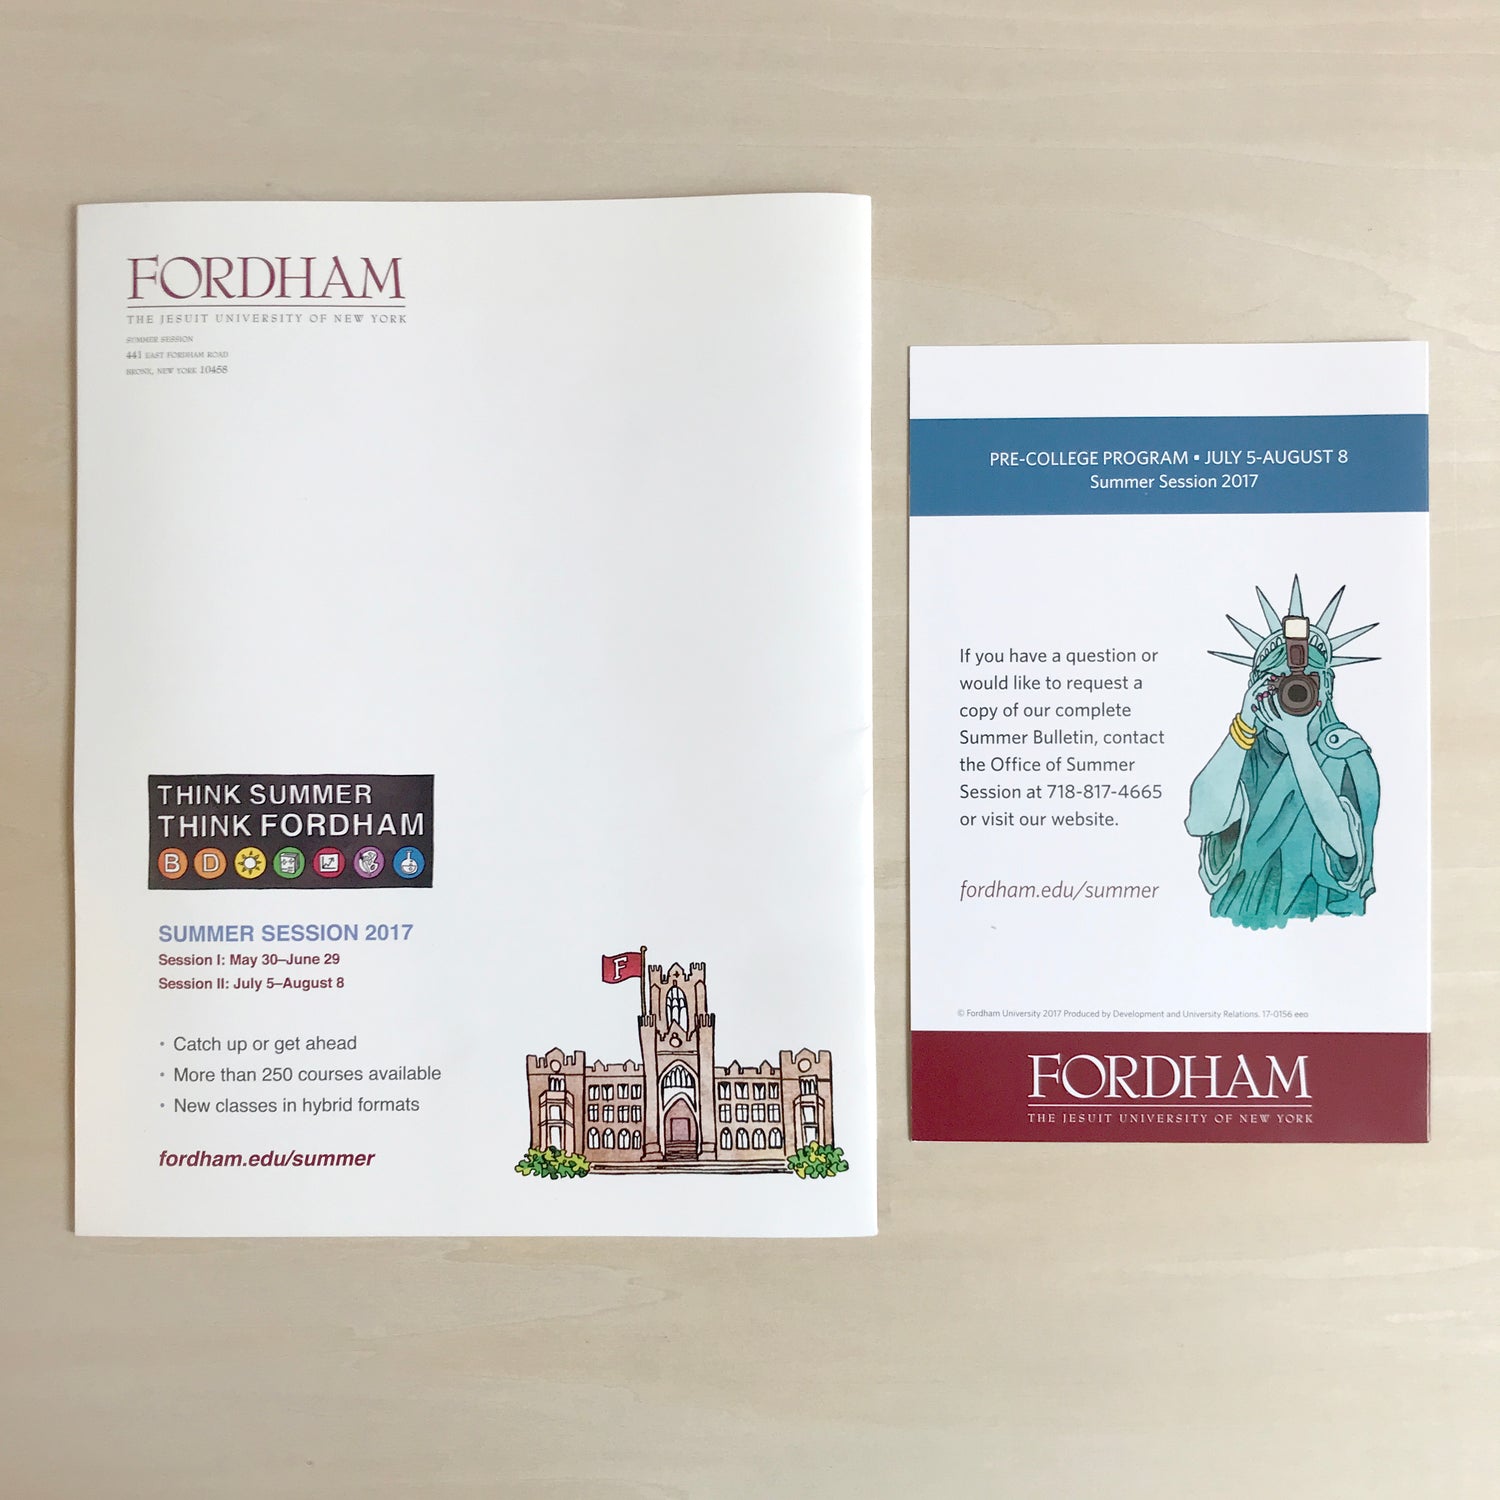 layout of backs of printed catalog on left and mailer on right for Fordham University's summer program. Illustrated customized Subway sign, Fordham building, Statue of Liberty on the back 